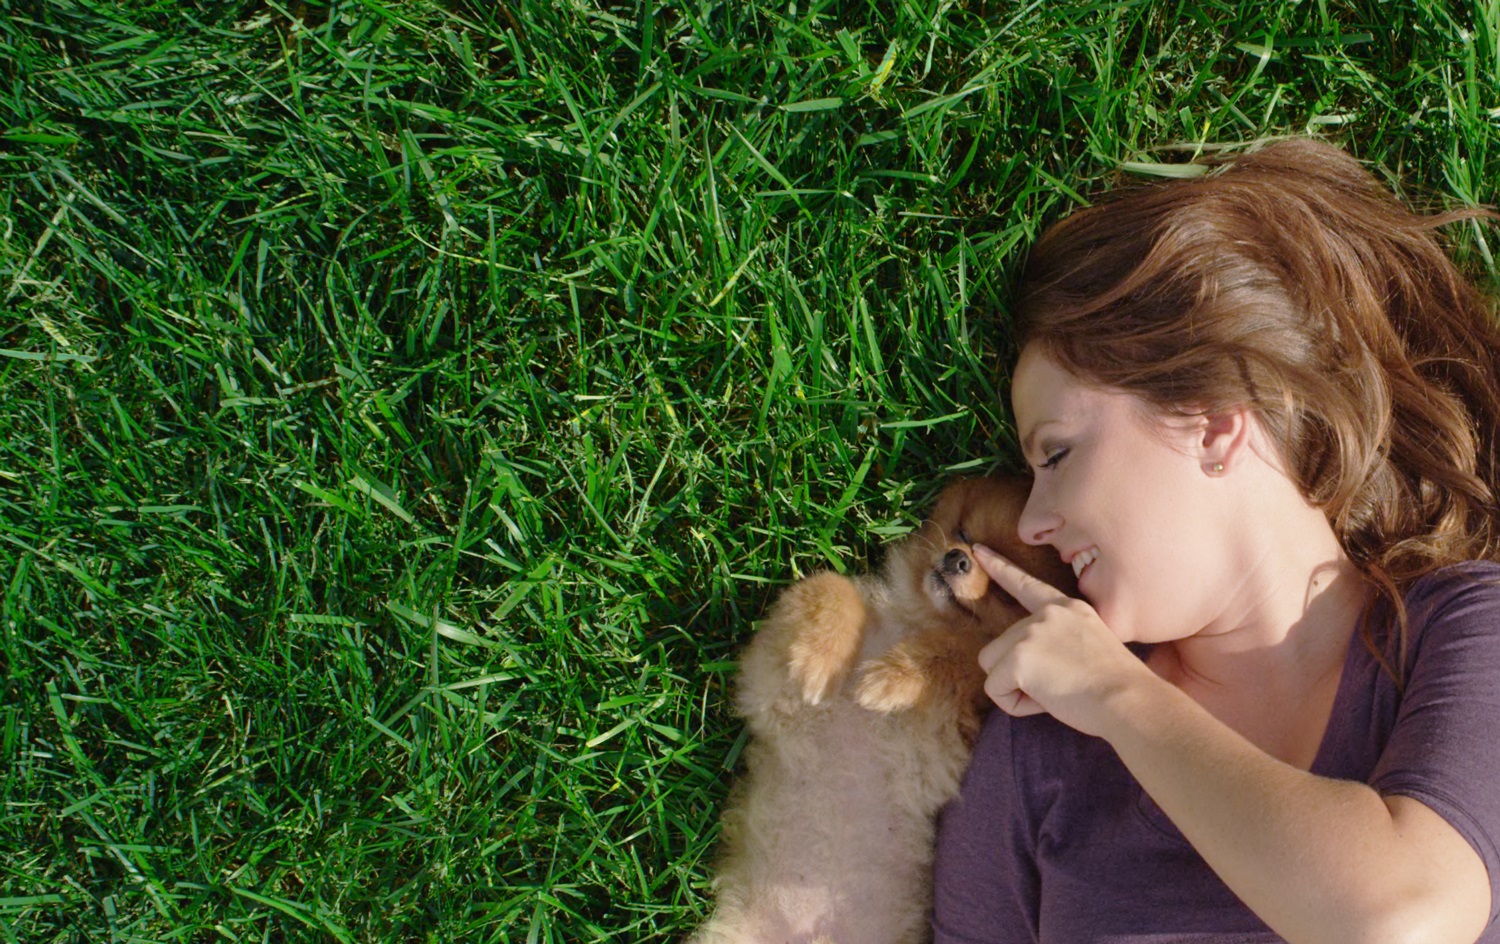 Pretty Woman playing with cute puppy on manicured green grass showing lawn care in Kingwood